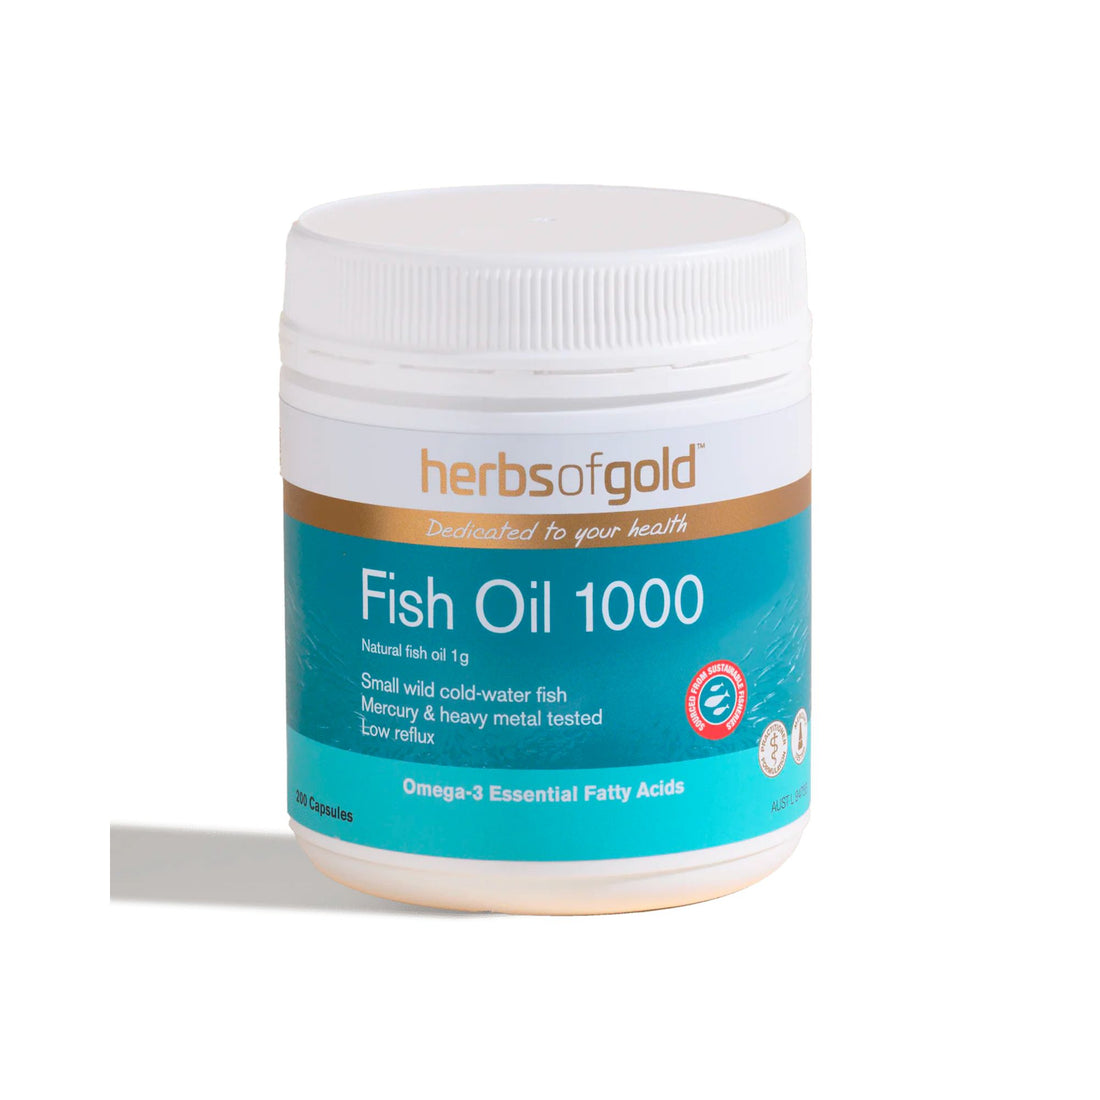 Herbs of Gold Fish Oil 1000 Vitamins and Health